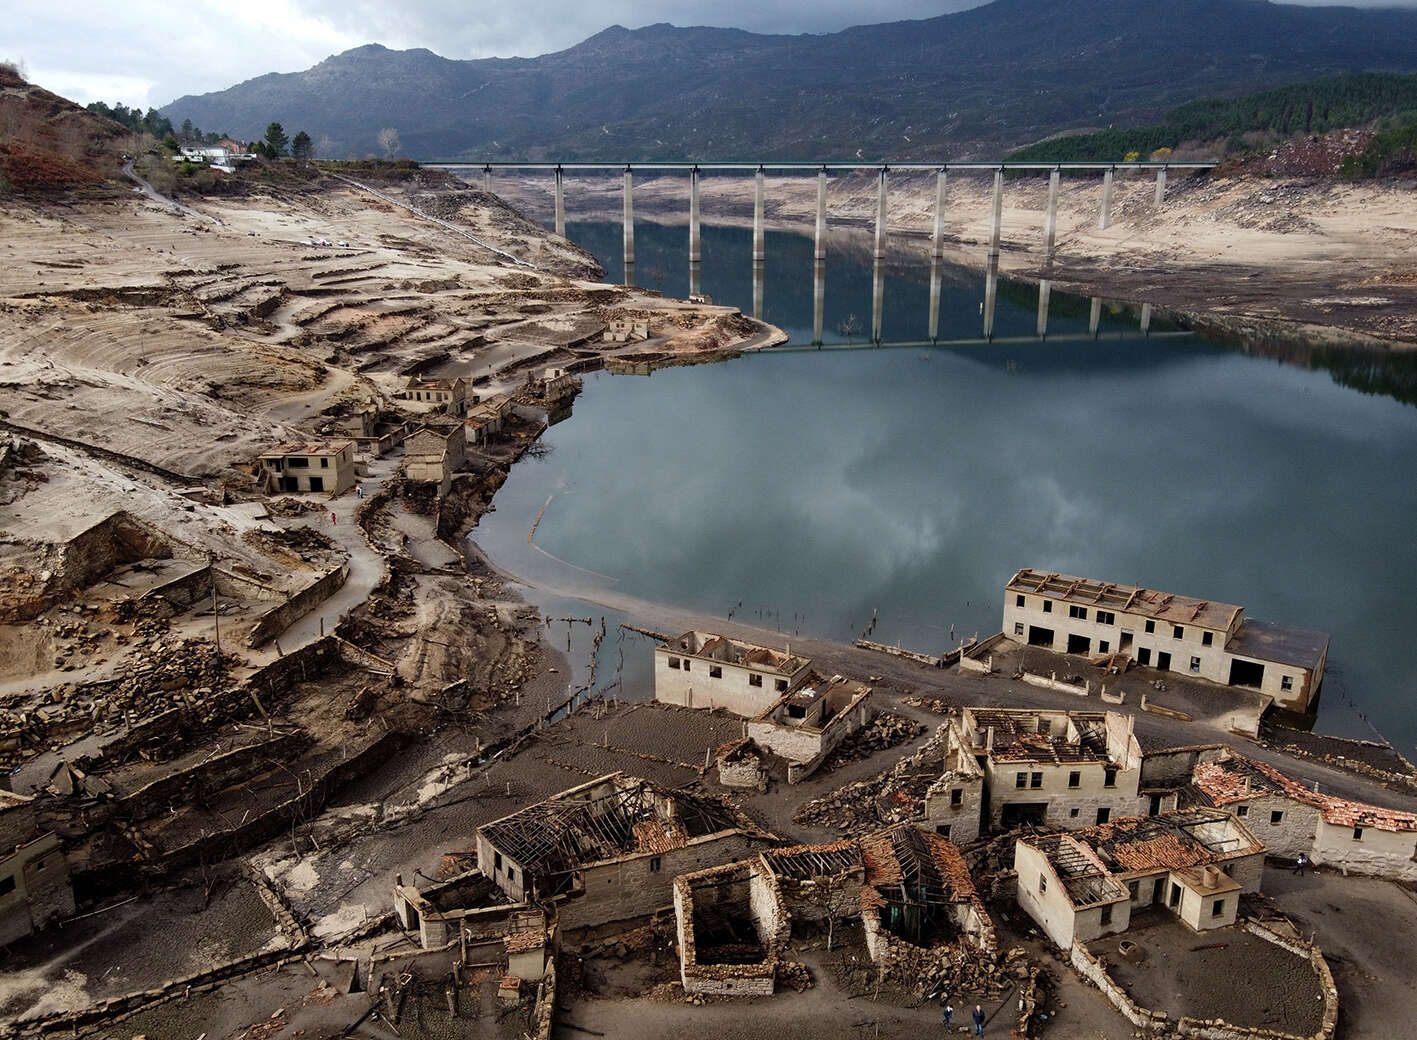 Europe’s worst drought on record needs to trigger a flood of climate action